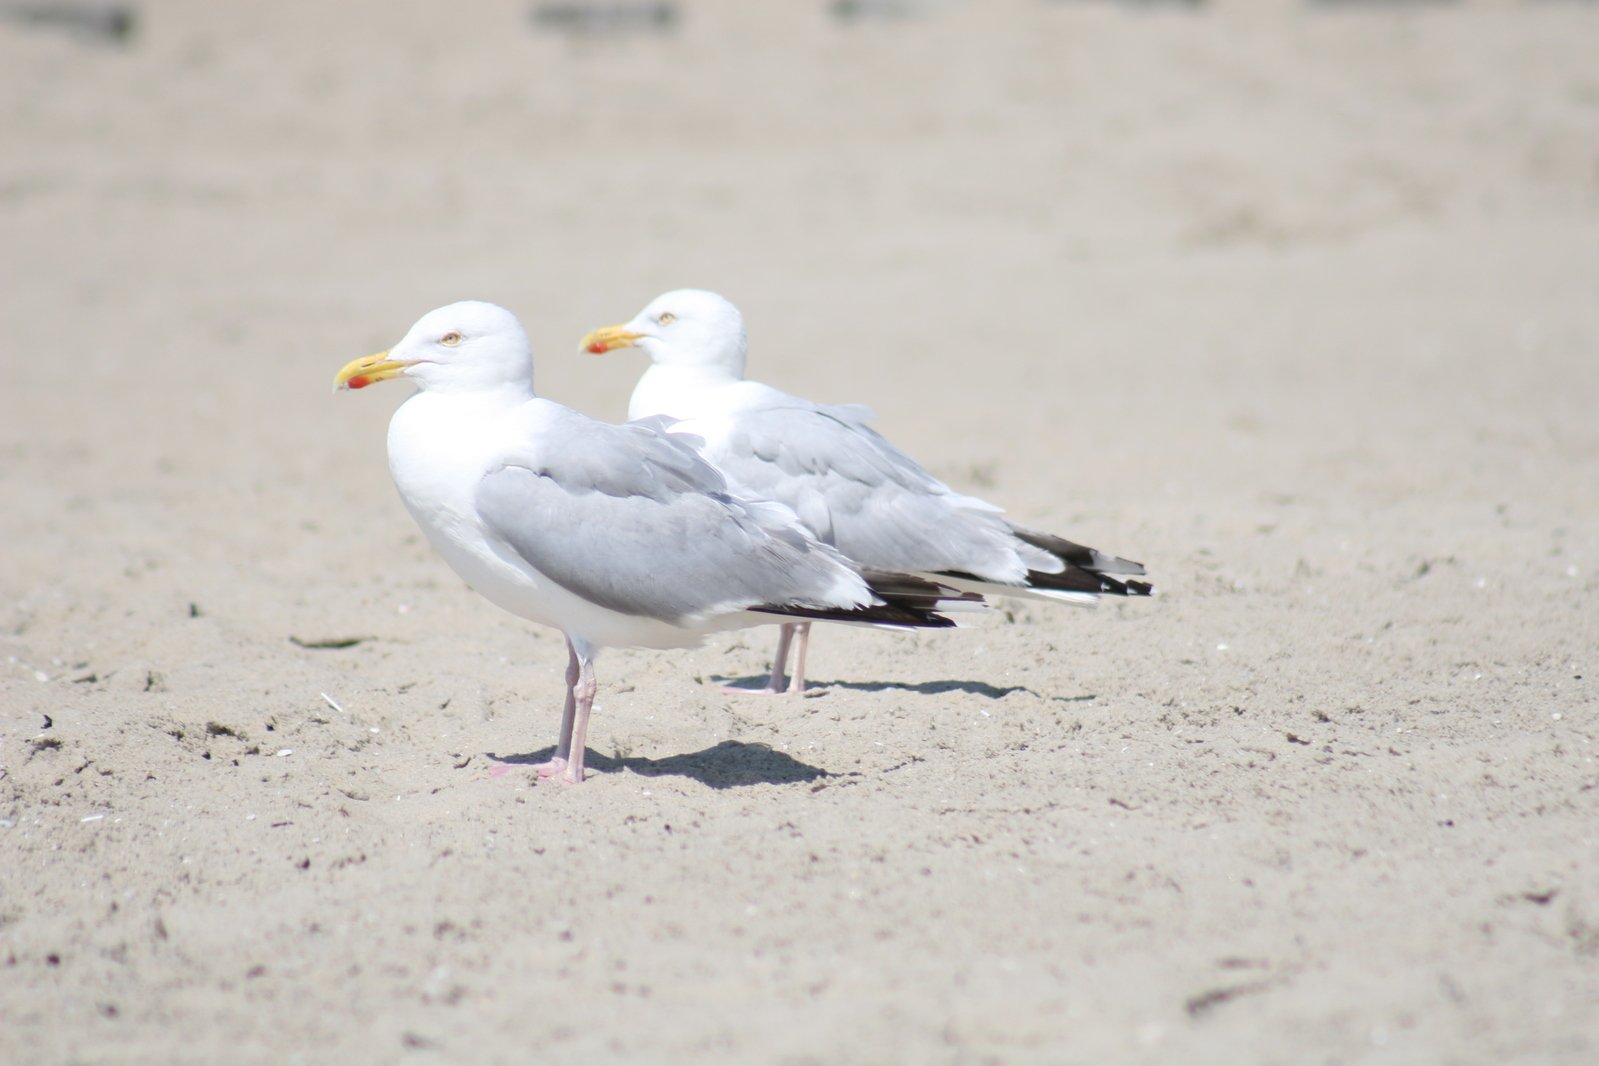 two seagulls standing on the sand in the sand